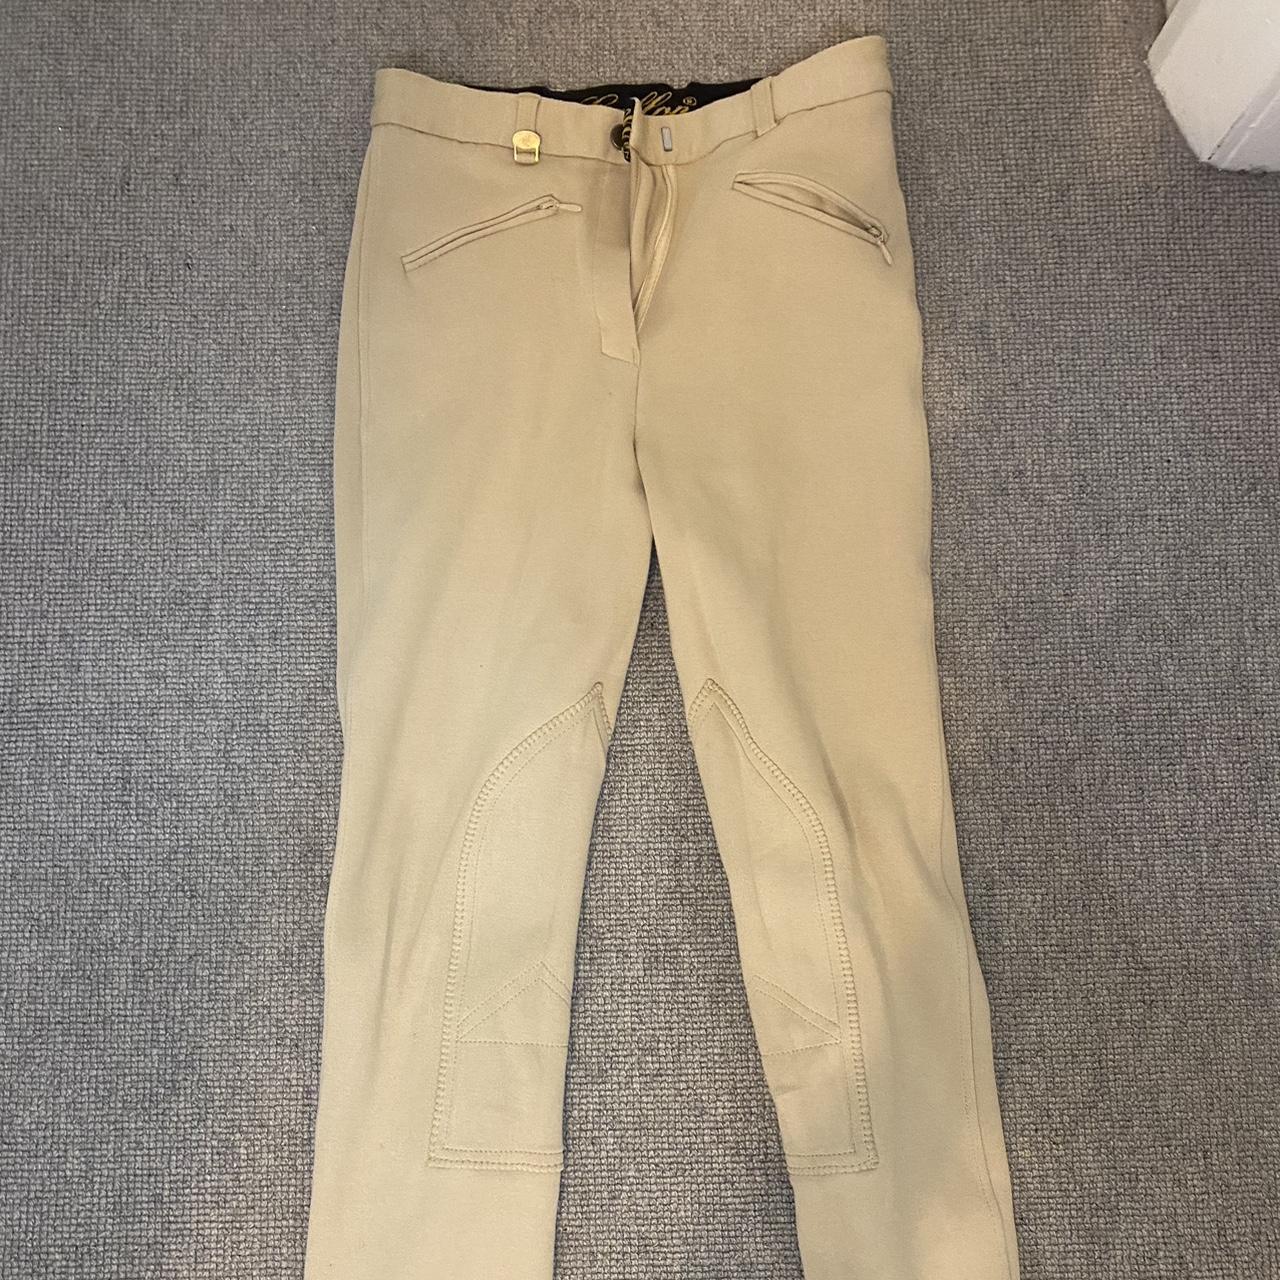 gallop jodhpurs size 26, bought these from brand new... - Depop